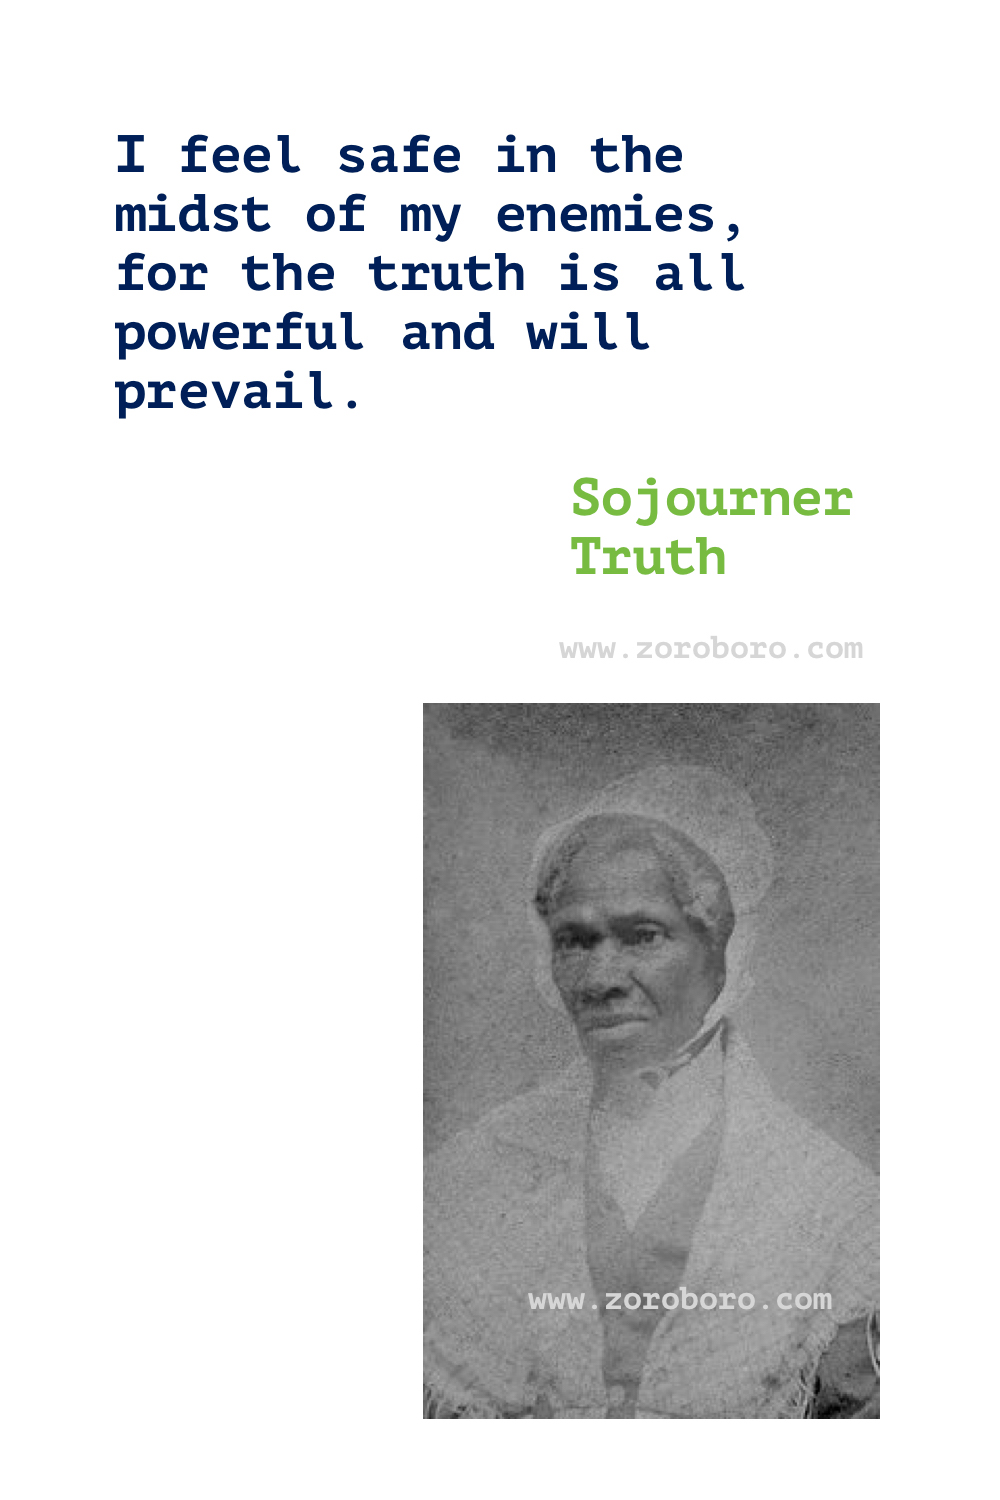 Sojourner Truth Quotes. Black History Quotes, Giving Quotes, Justice Quotes, Slavery Quotes. Sojourner Truth Books Quotes. Sojourner Truth